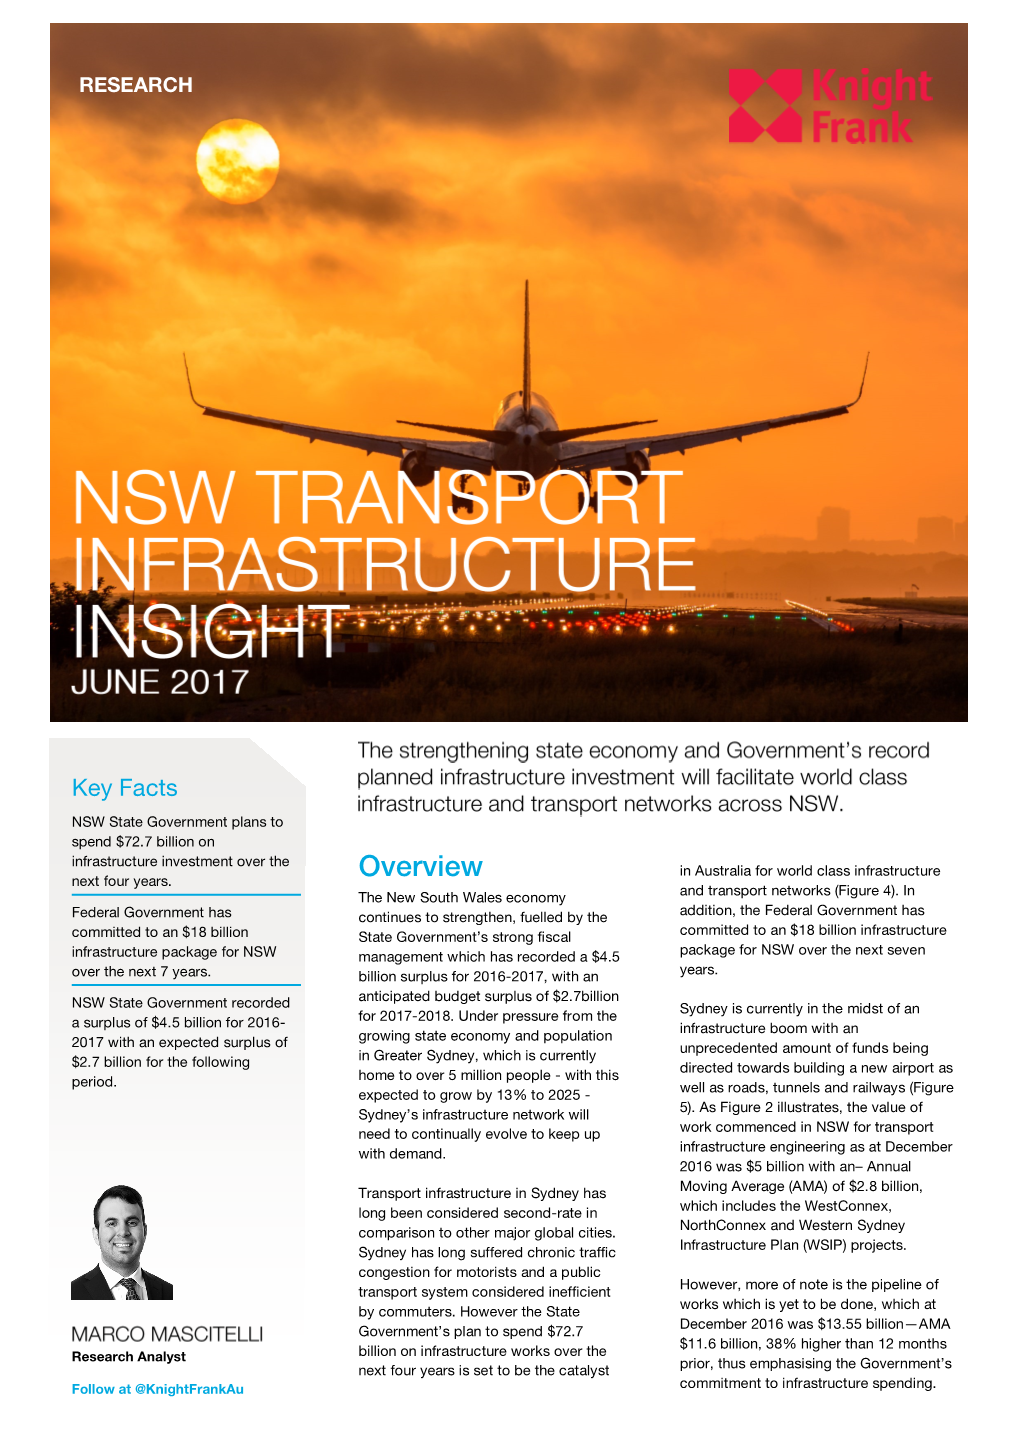 NSW Transport Infrastructure Insight